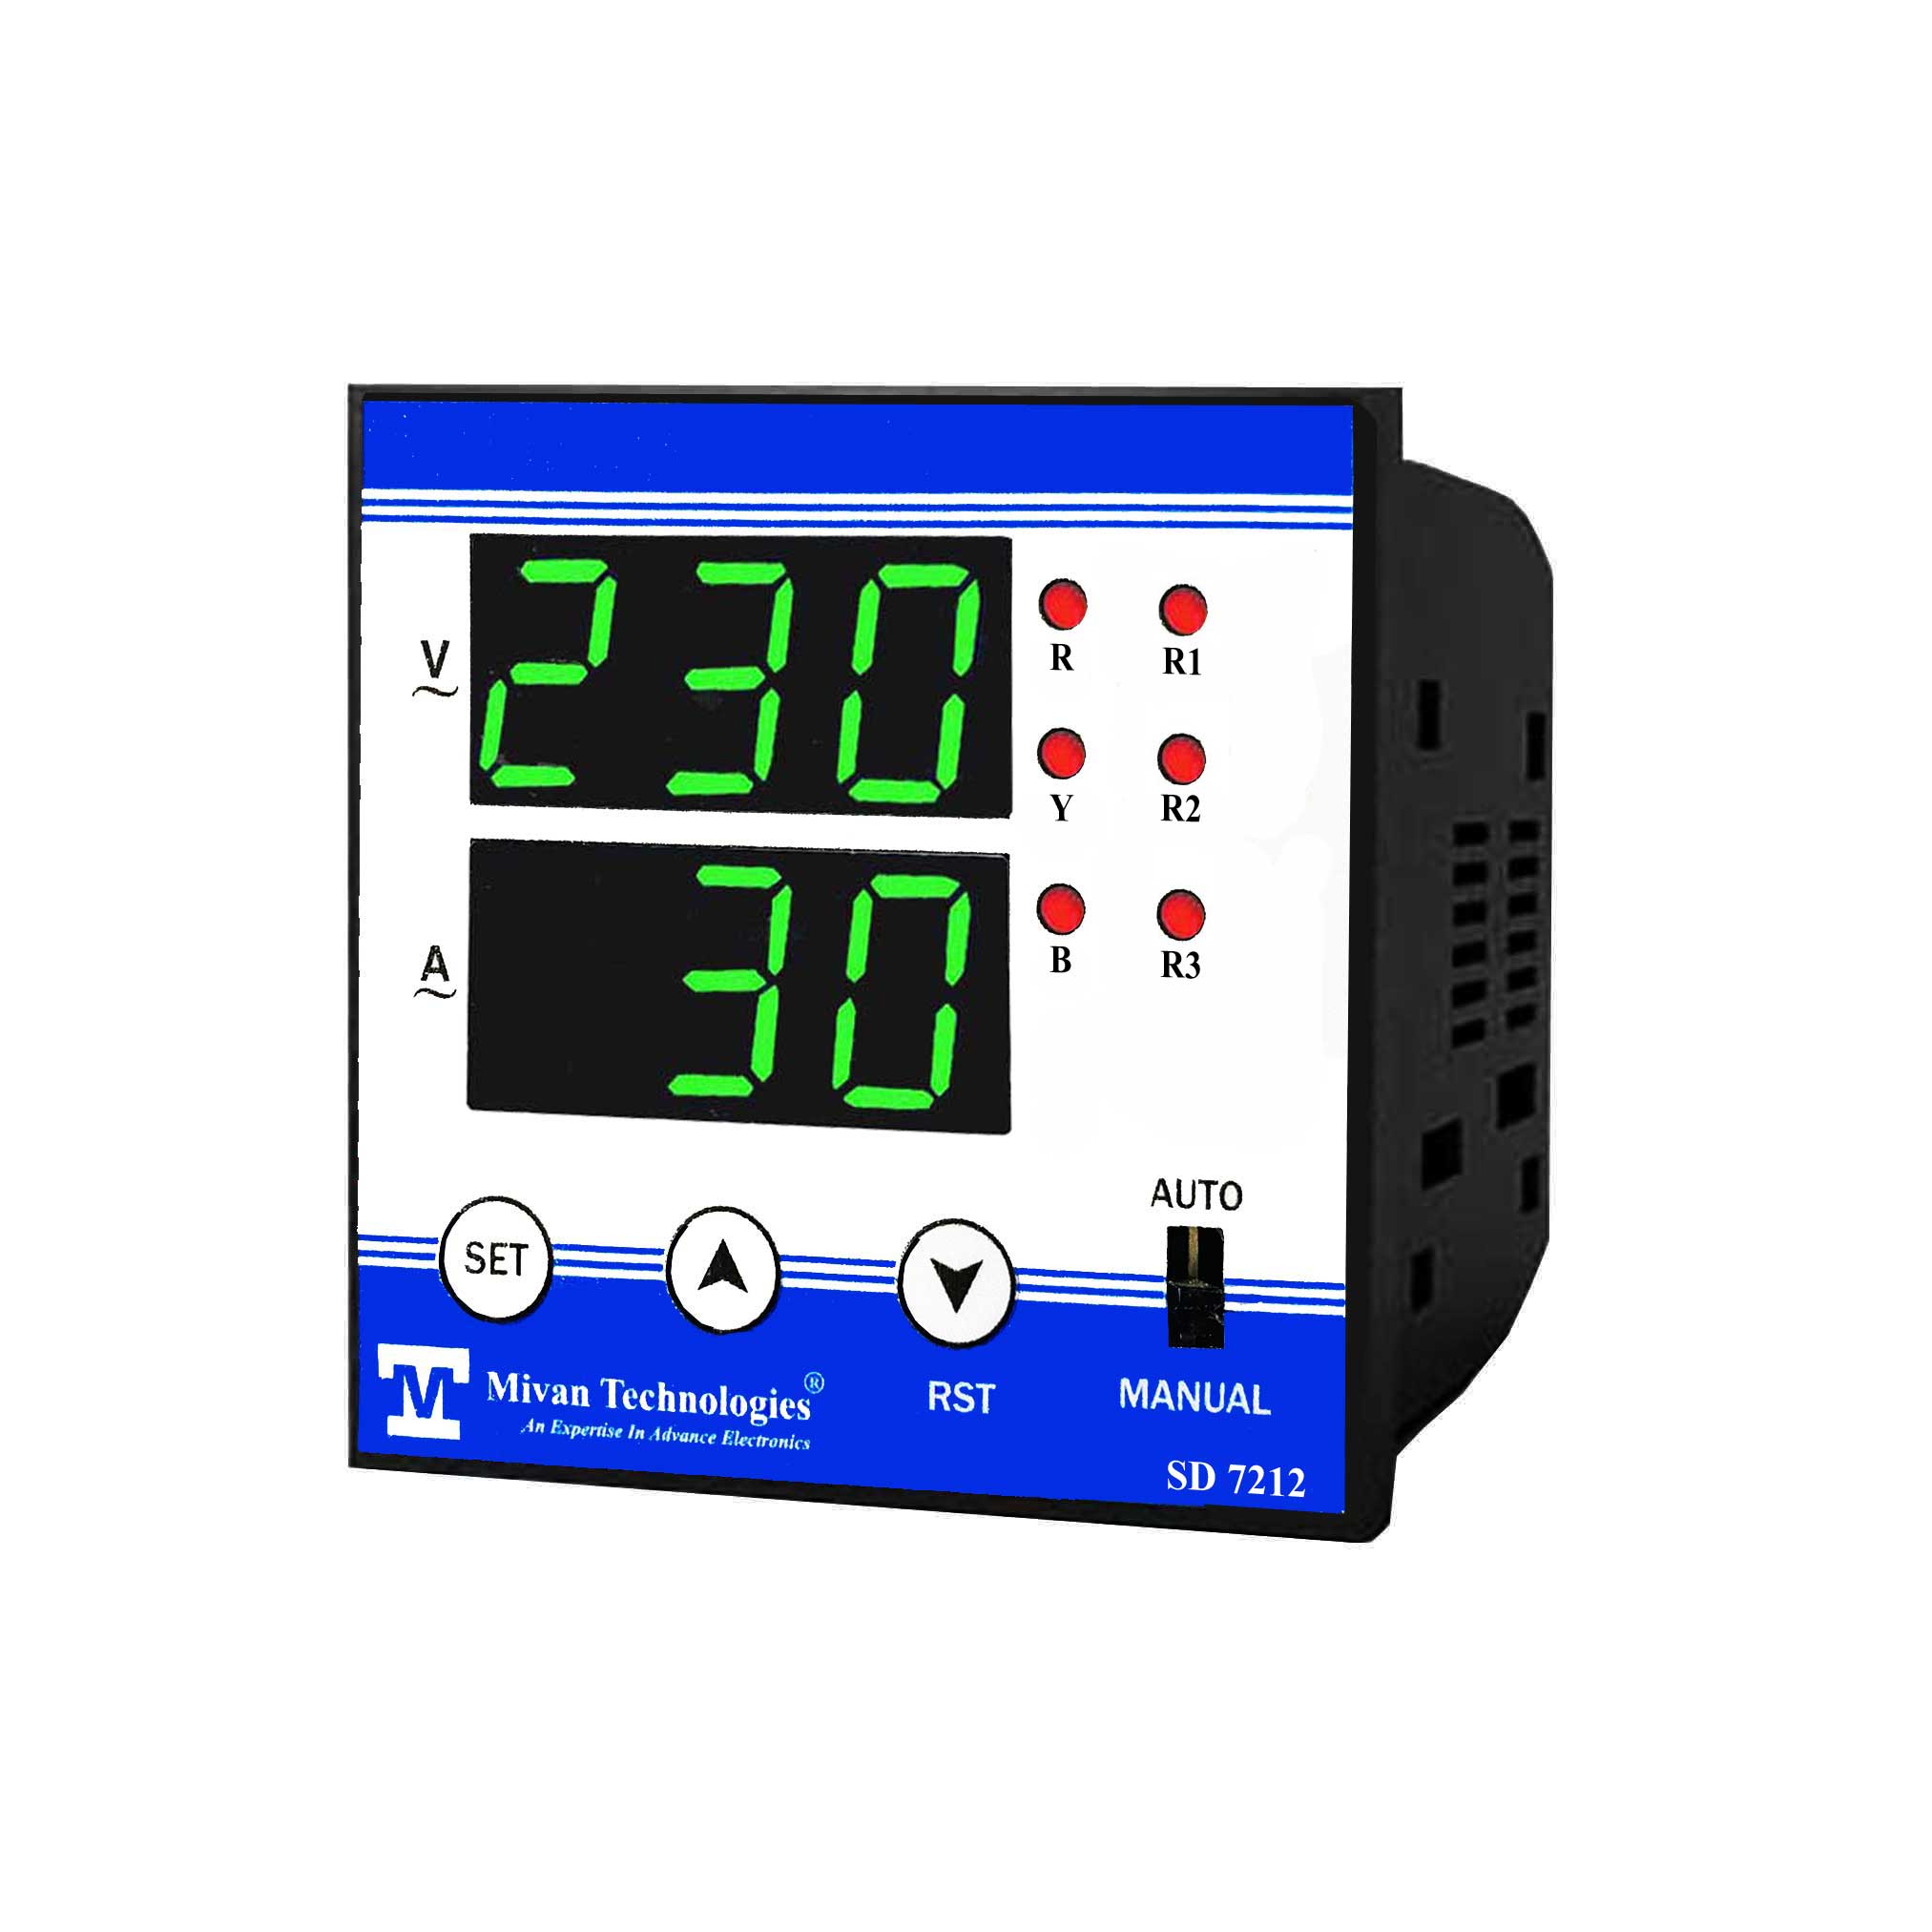 SD 7212 instrument to design any hp Star Delta starter to provide HV LV OL Dry protection with timer spp auto switch